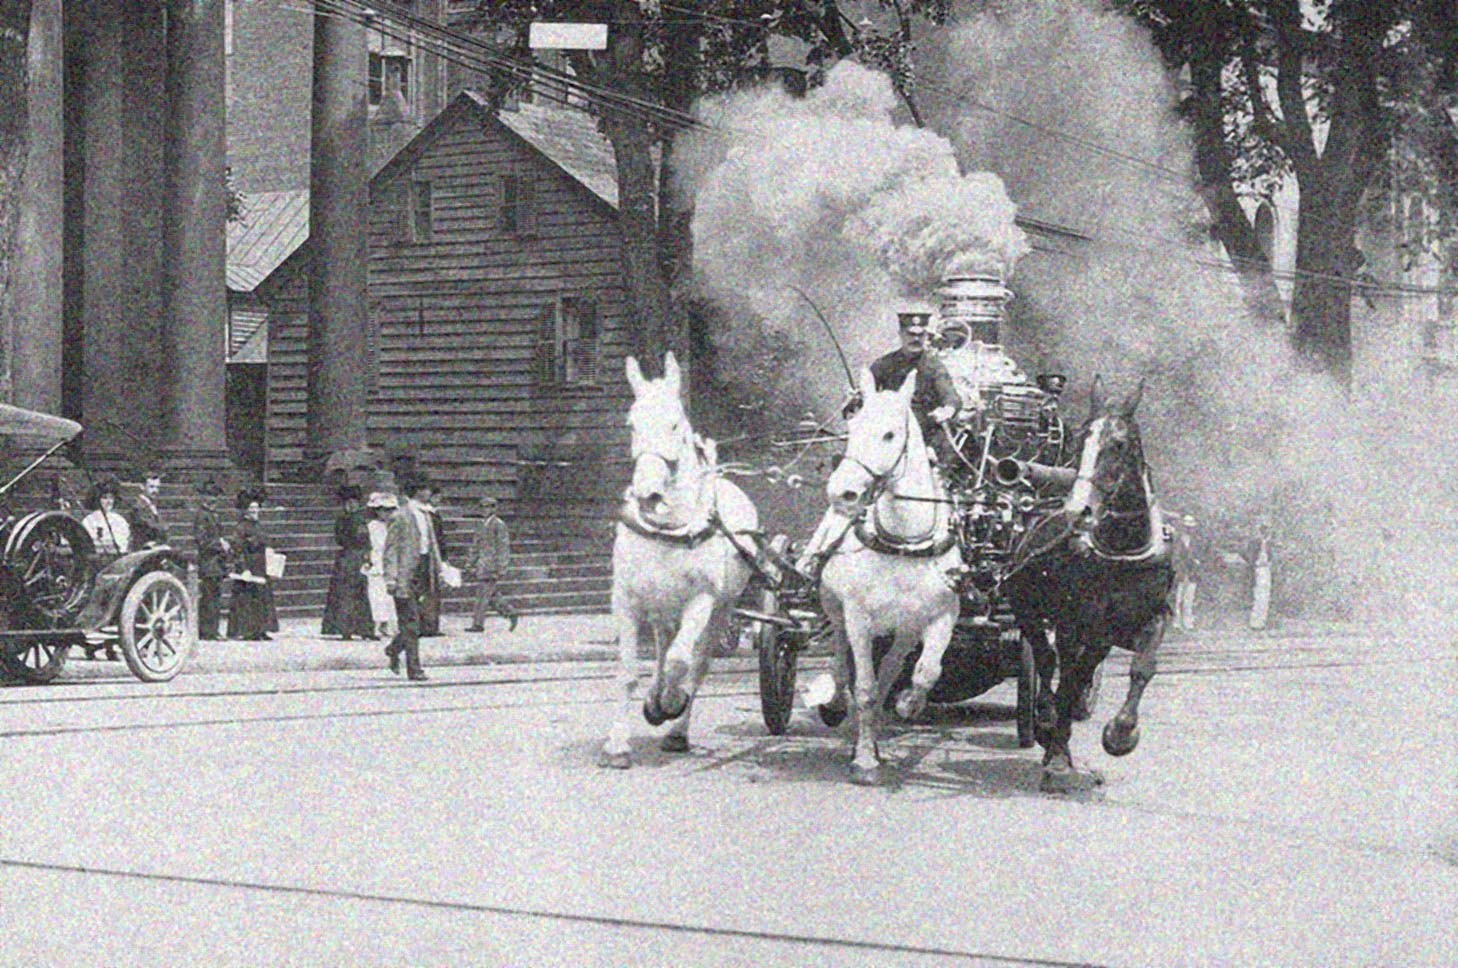 Ross's image of the New Haven (CT) Fire Department's horse drawn steam fire engine, 1913.jpg